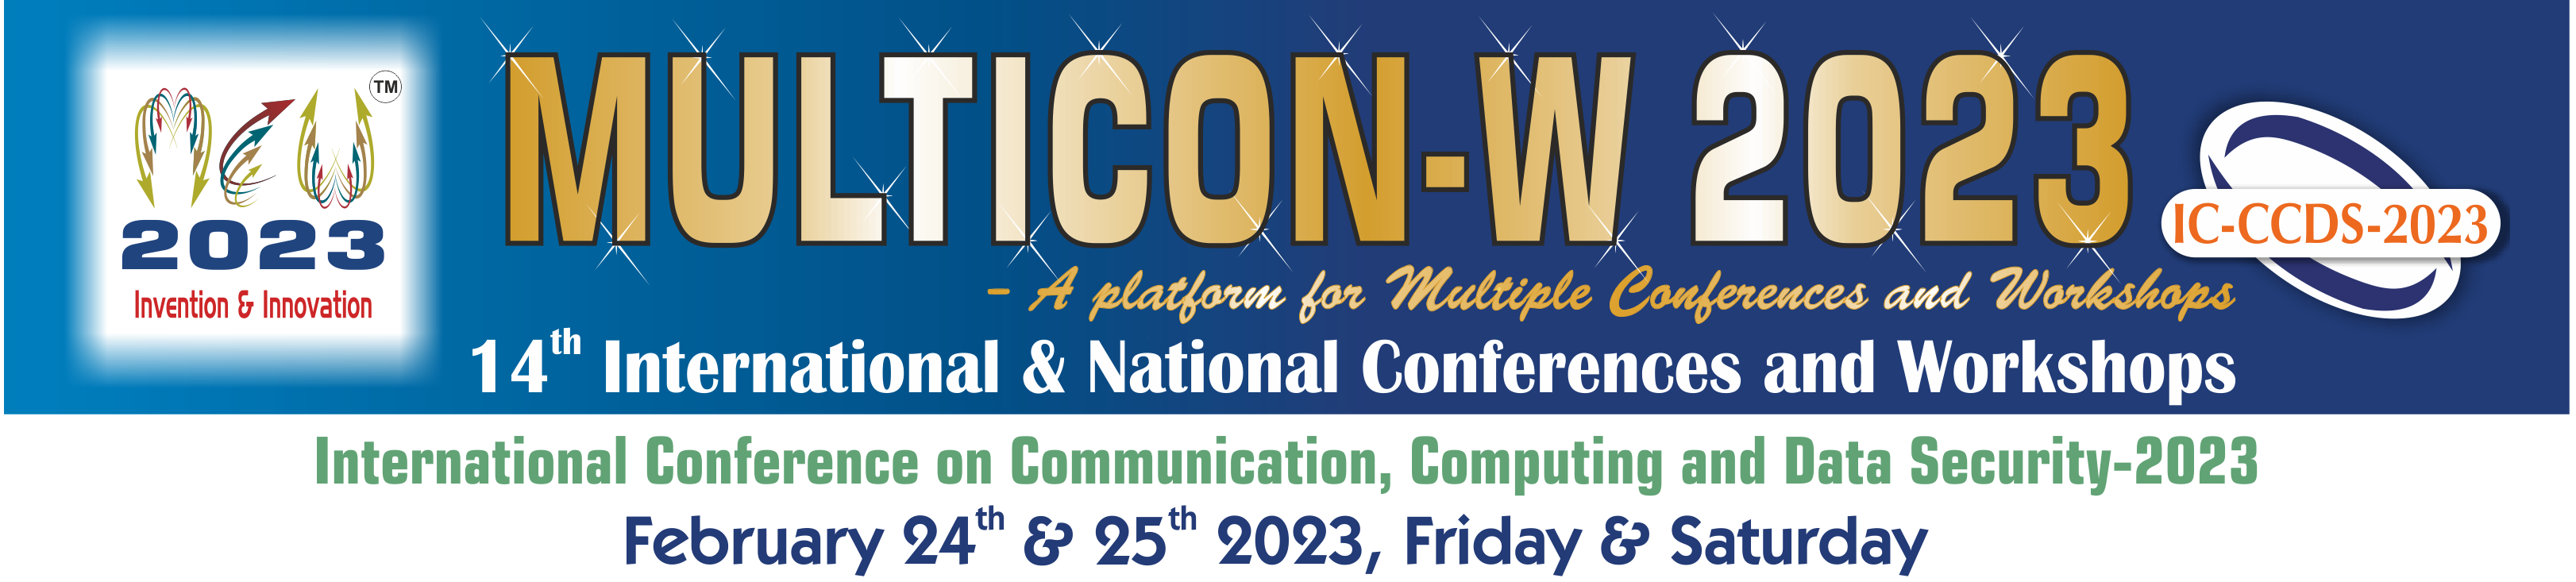 International Conference on Communication, Computing and Data Security-2023 (ICCCDS – 2023) 